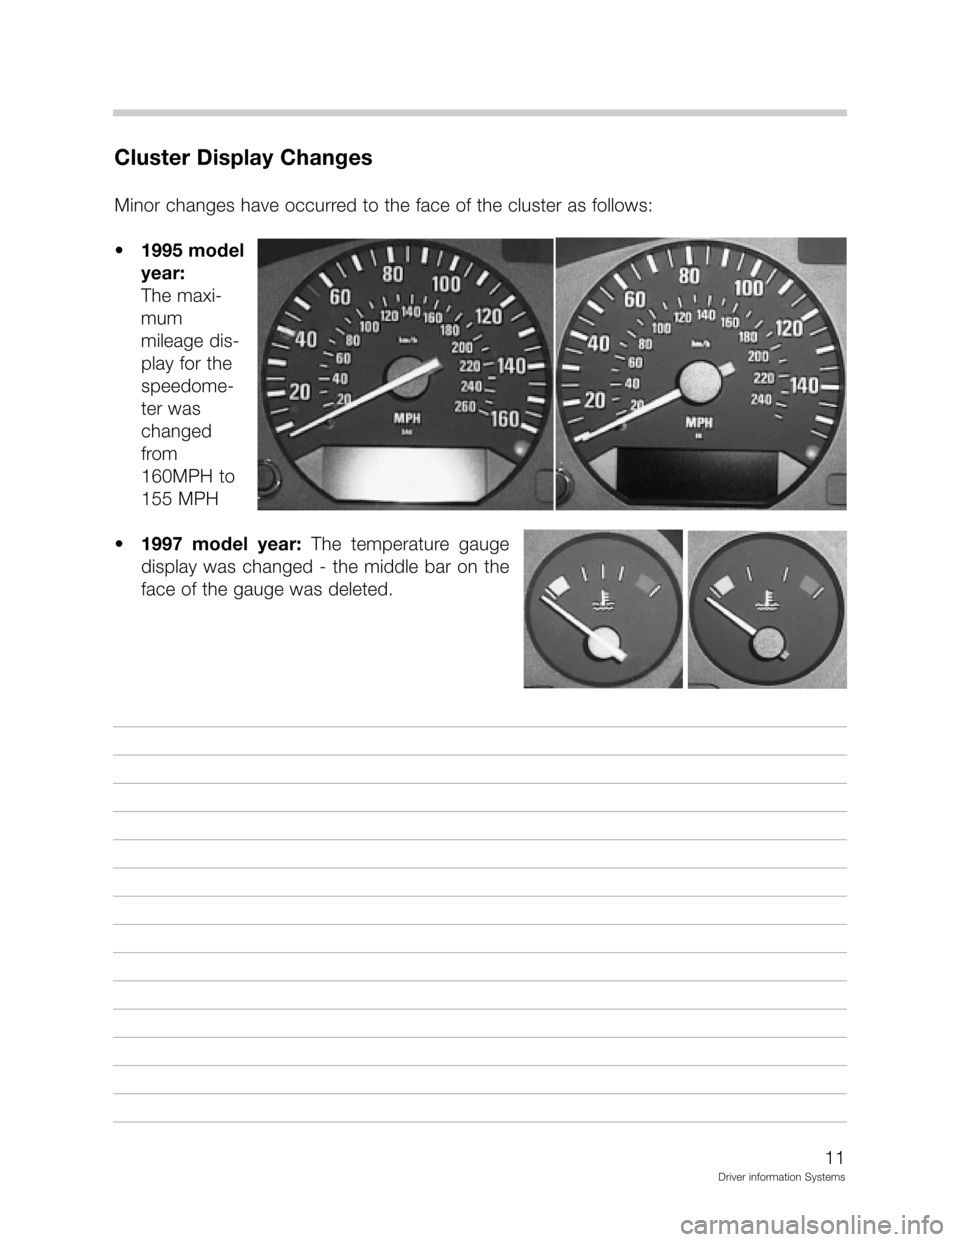 BMW Z3 CONVERTIBLE 1997 E36 Driver Information Systems Manual 	-+	
&2	!;;
	;

:>
?9==6
	
	3

F

	



!

;
!

:
!
;

(&+7
%%&+7
?9